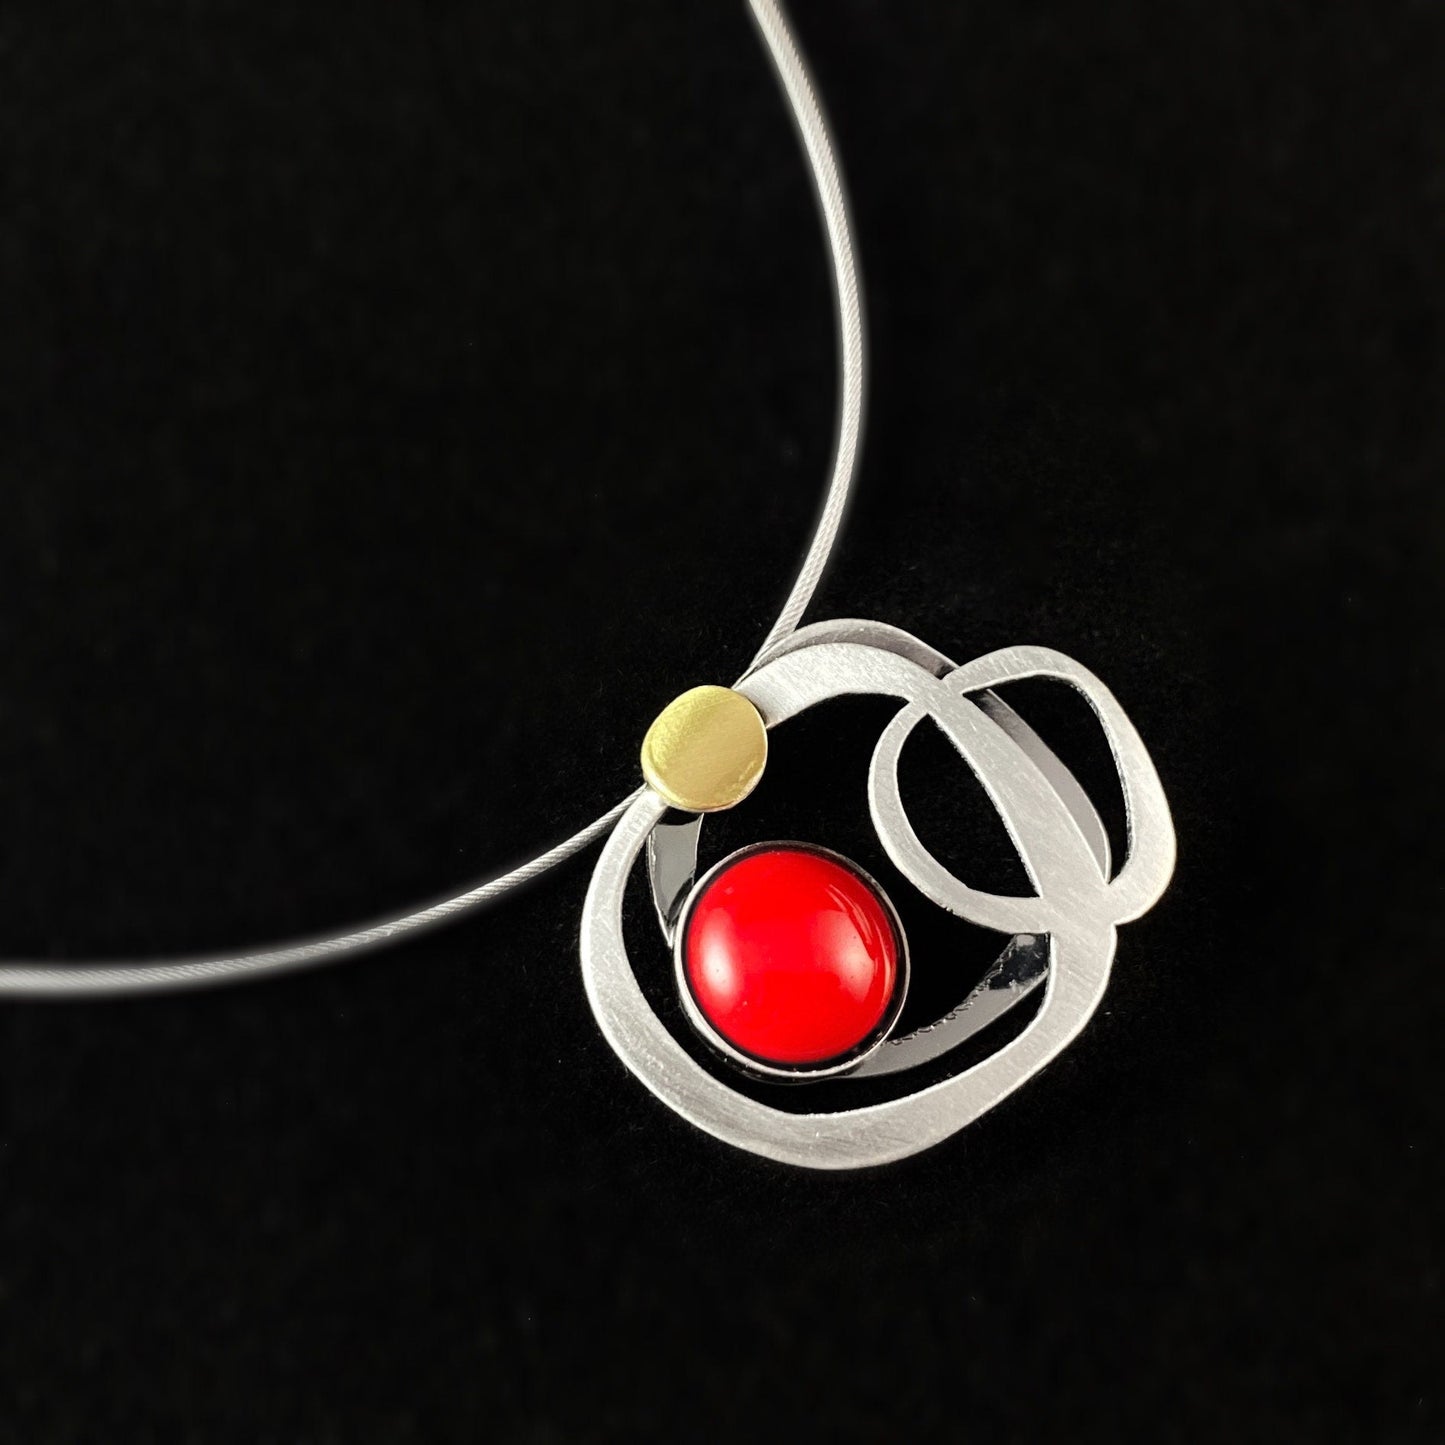 Lightweight Handmade Geometric Aluminum Necklace, Silver and Red Circles